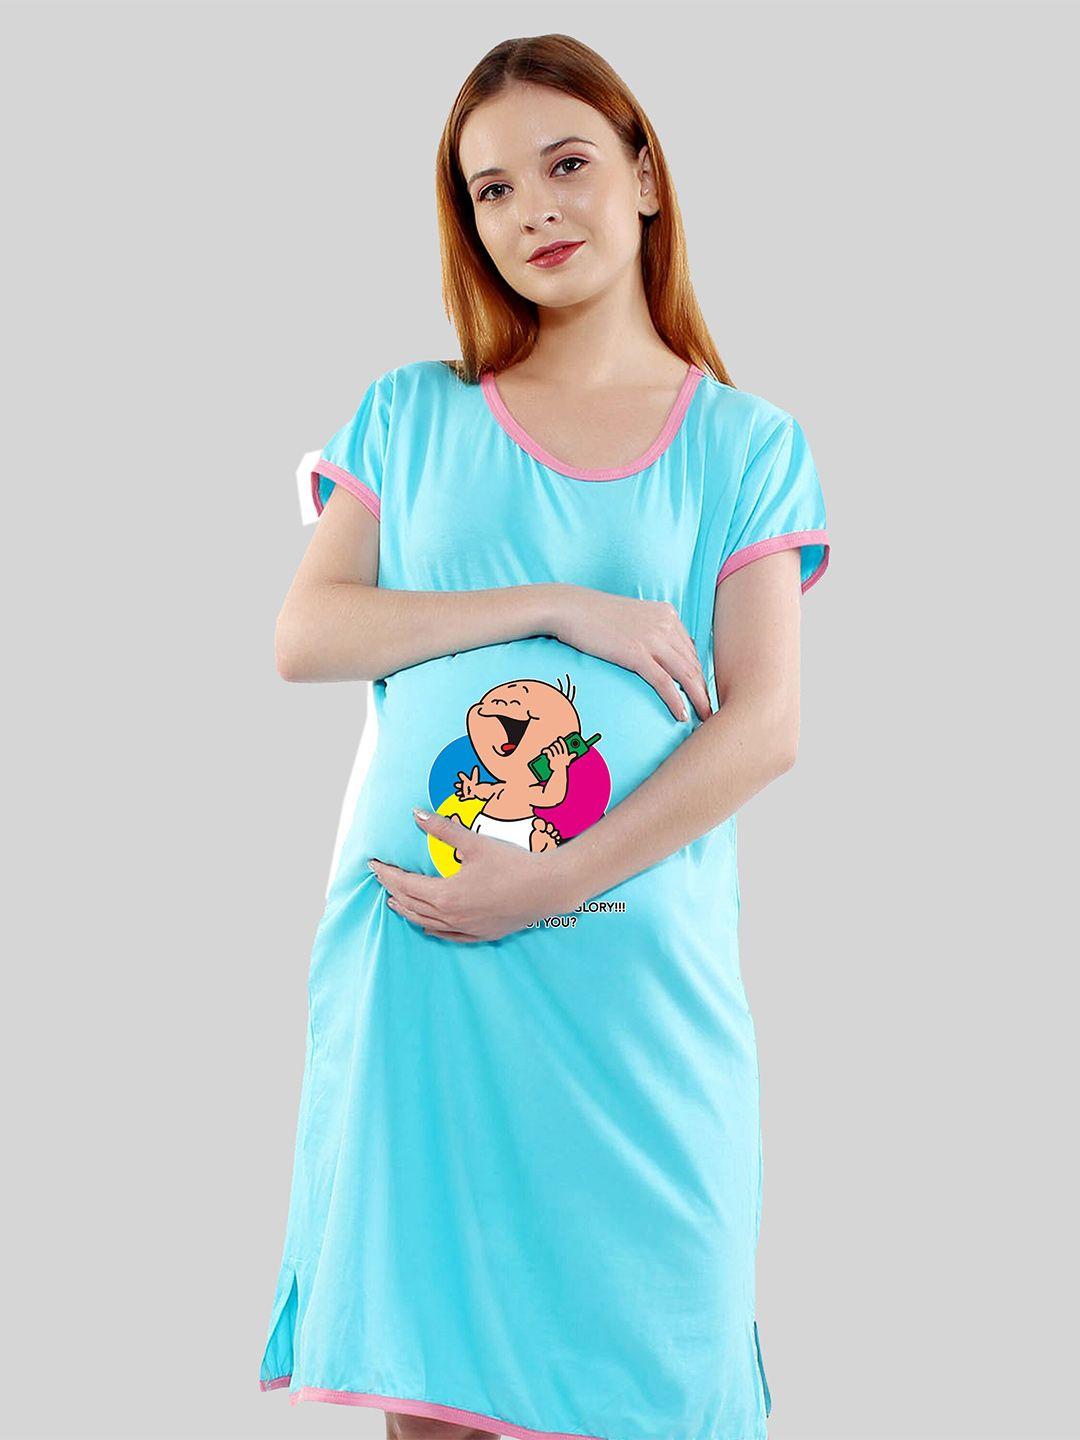 sillyboom printed cotton maternity t-shirt dress